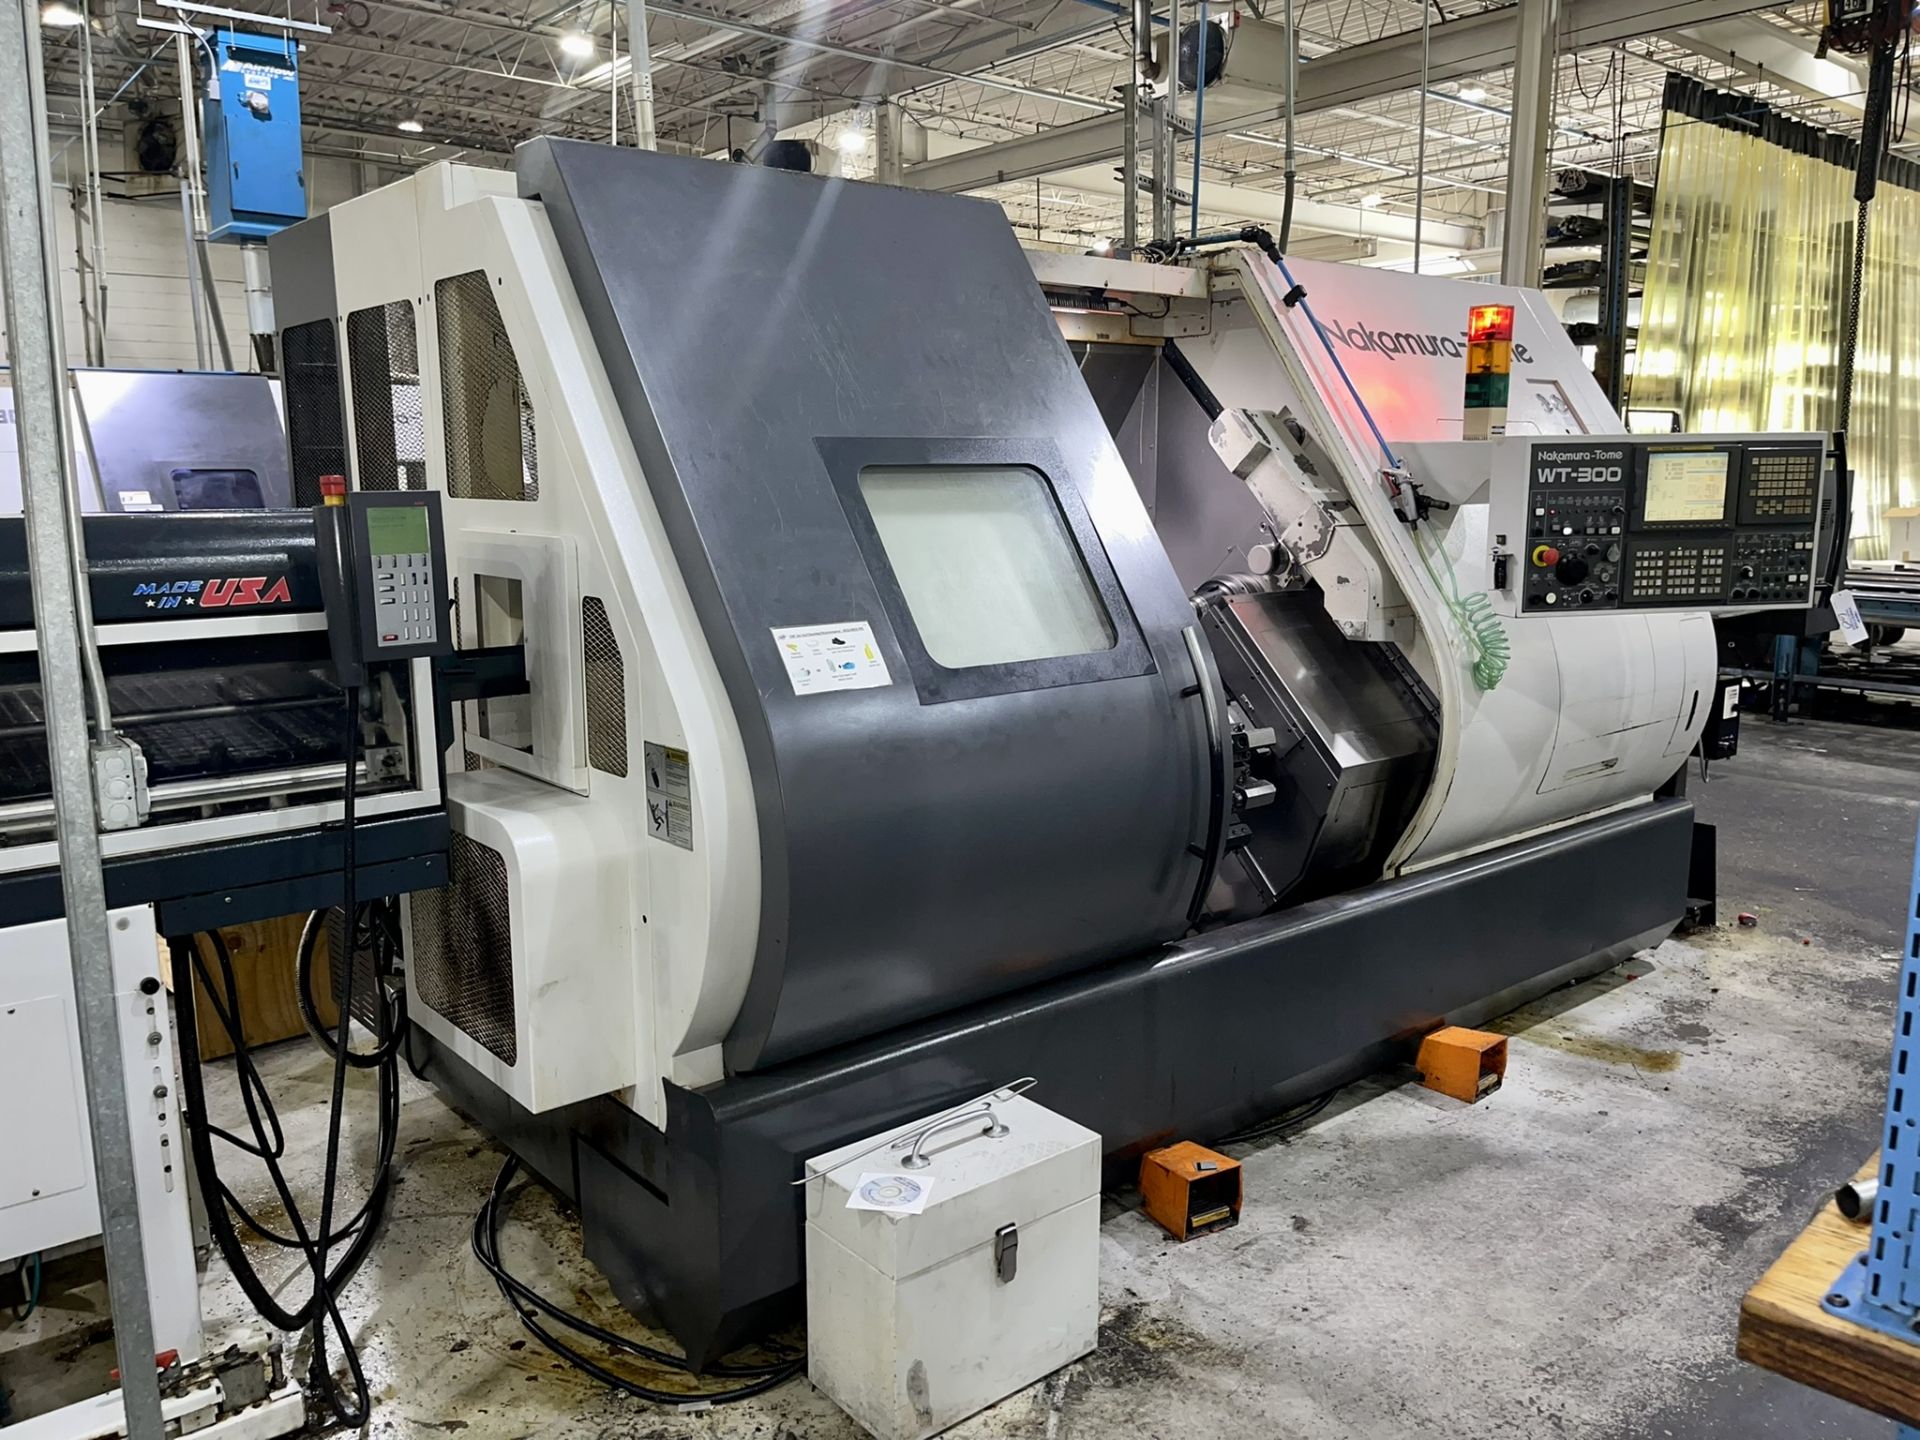 2007 Nakamura Tome WT-300 8-Axis CNC Turning/Milling Center, S/N M300909 - Image 3 of 19